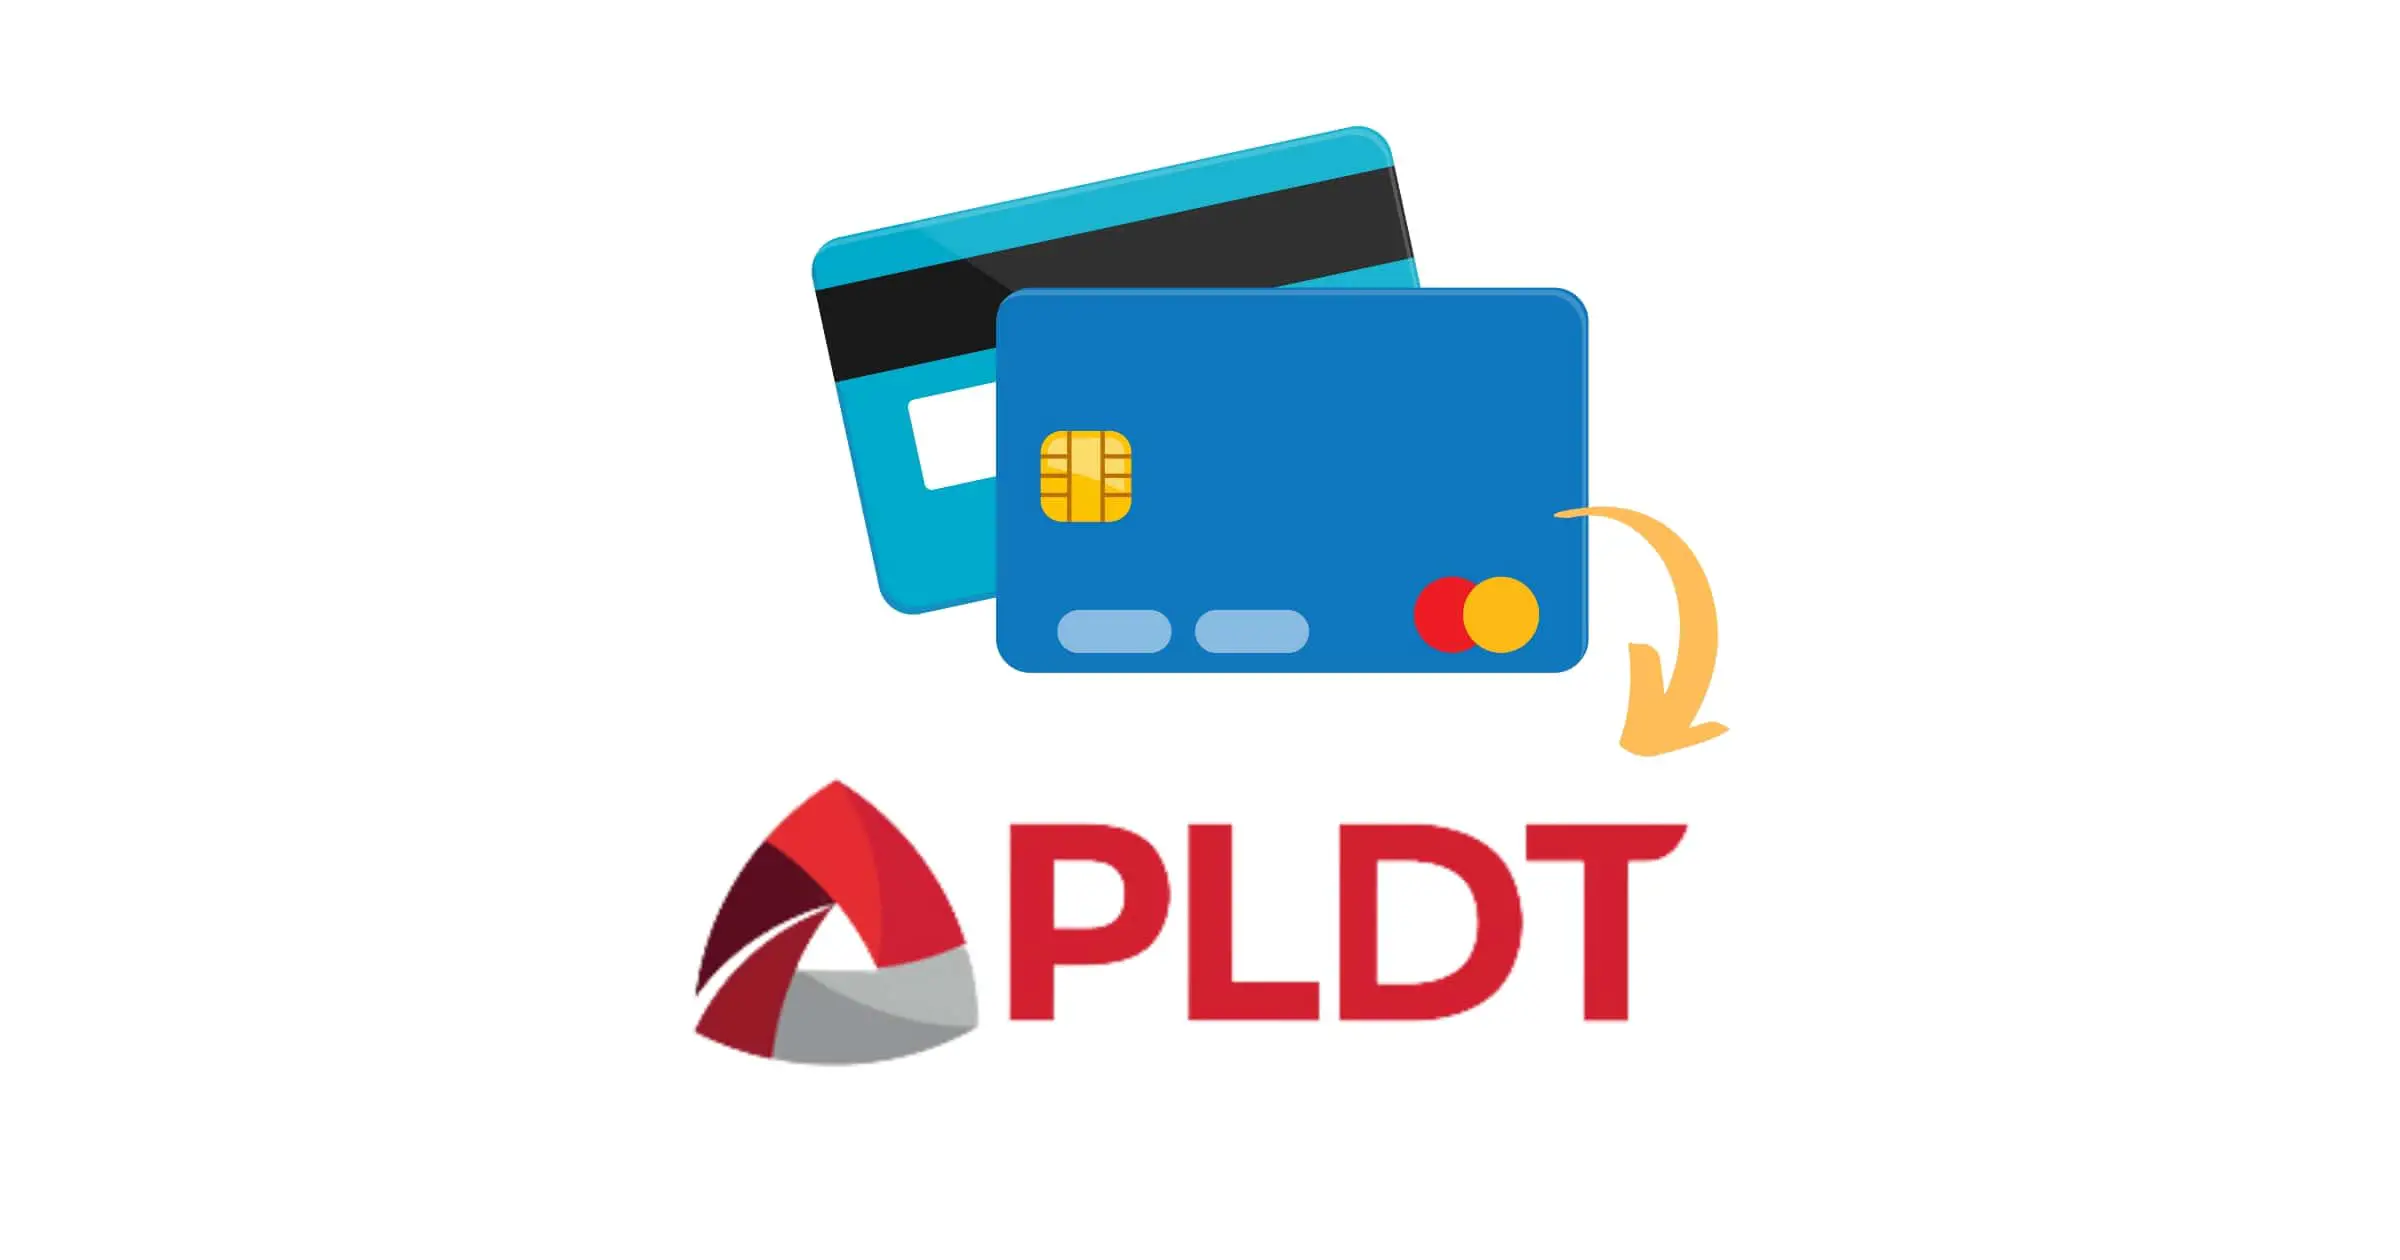 How to pay PLDT using credit card